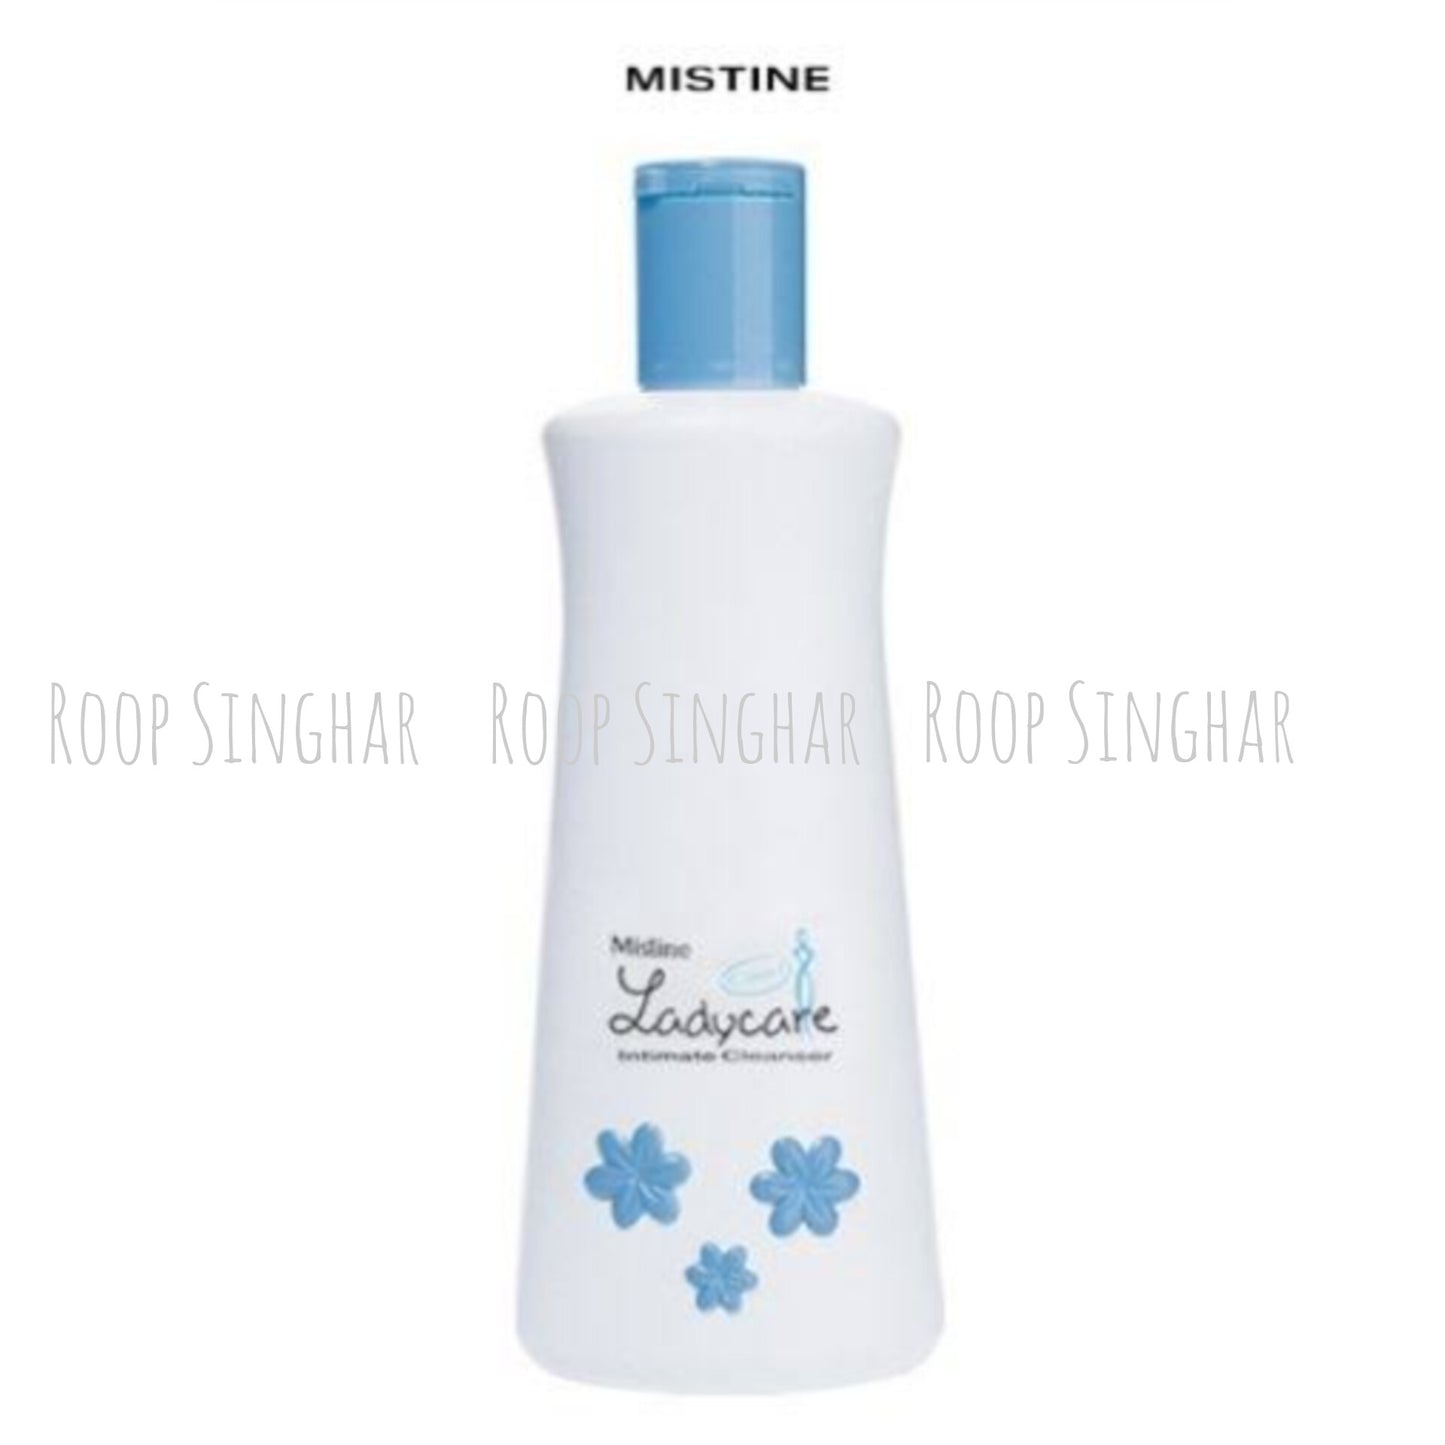 Mistine Lady Care Intimate Cleanser